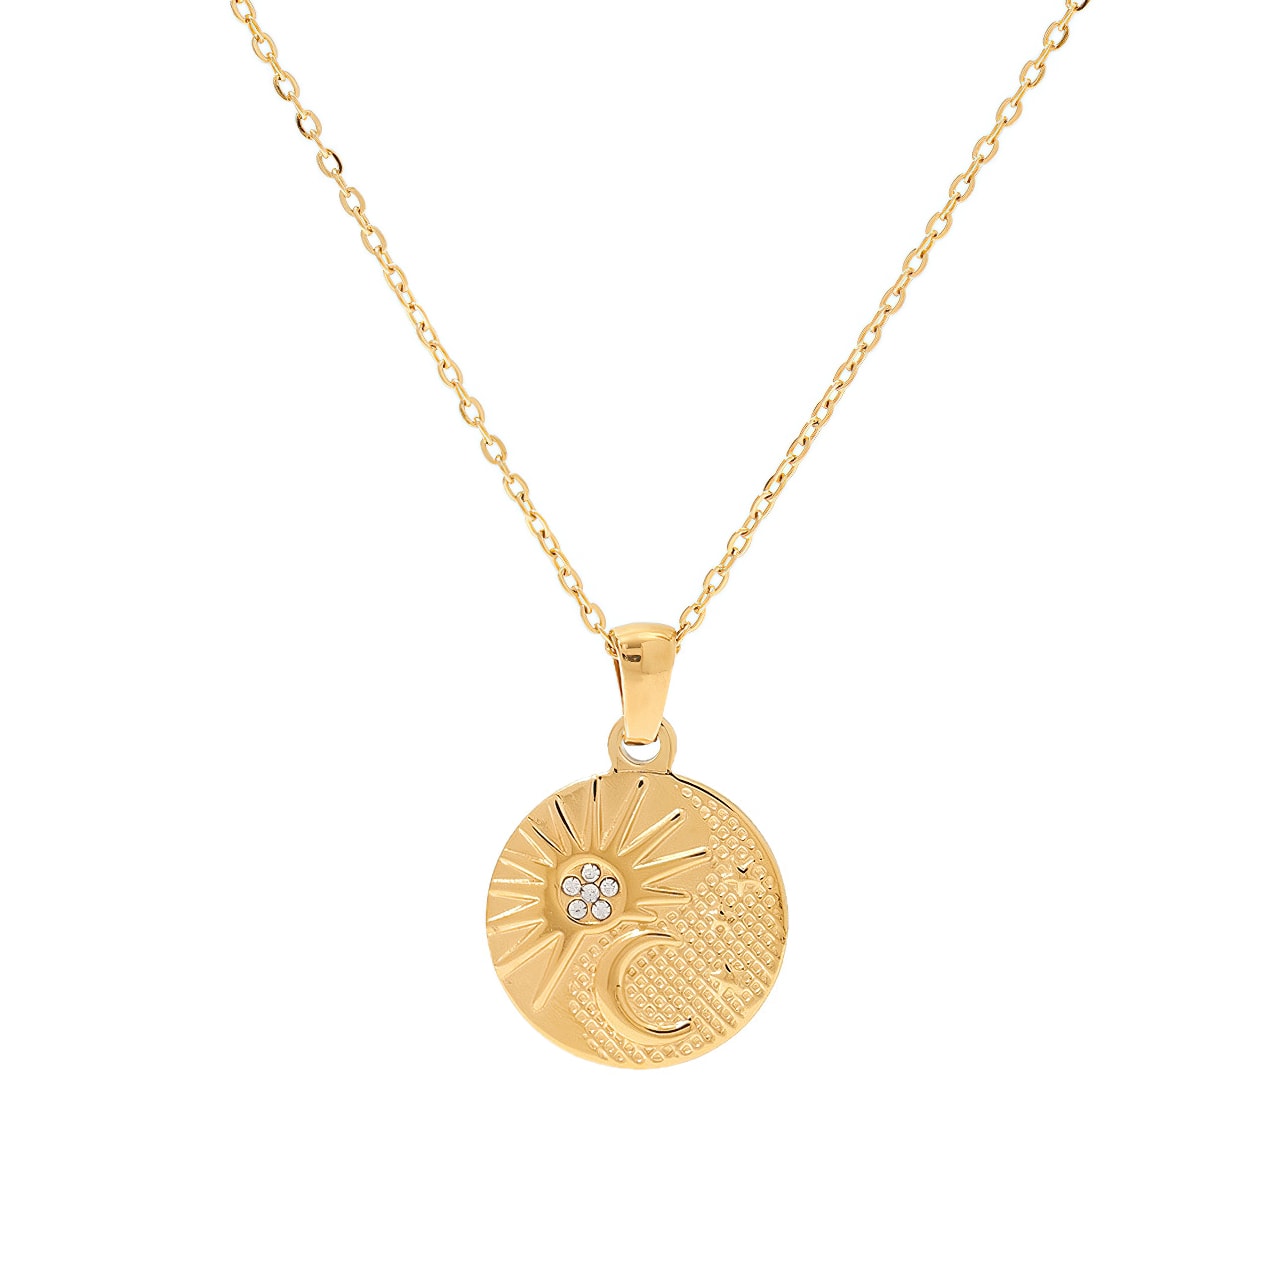 Embossed Sun Moon and Stars 18k Gold Plated Pendant Necklace - REMY